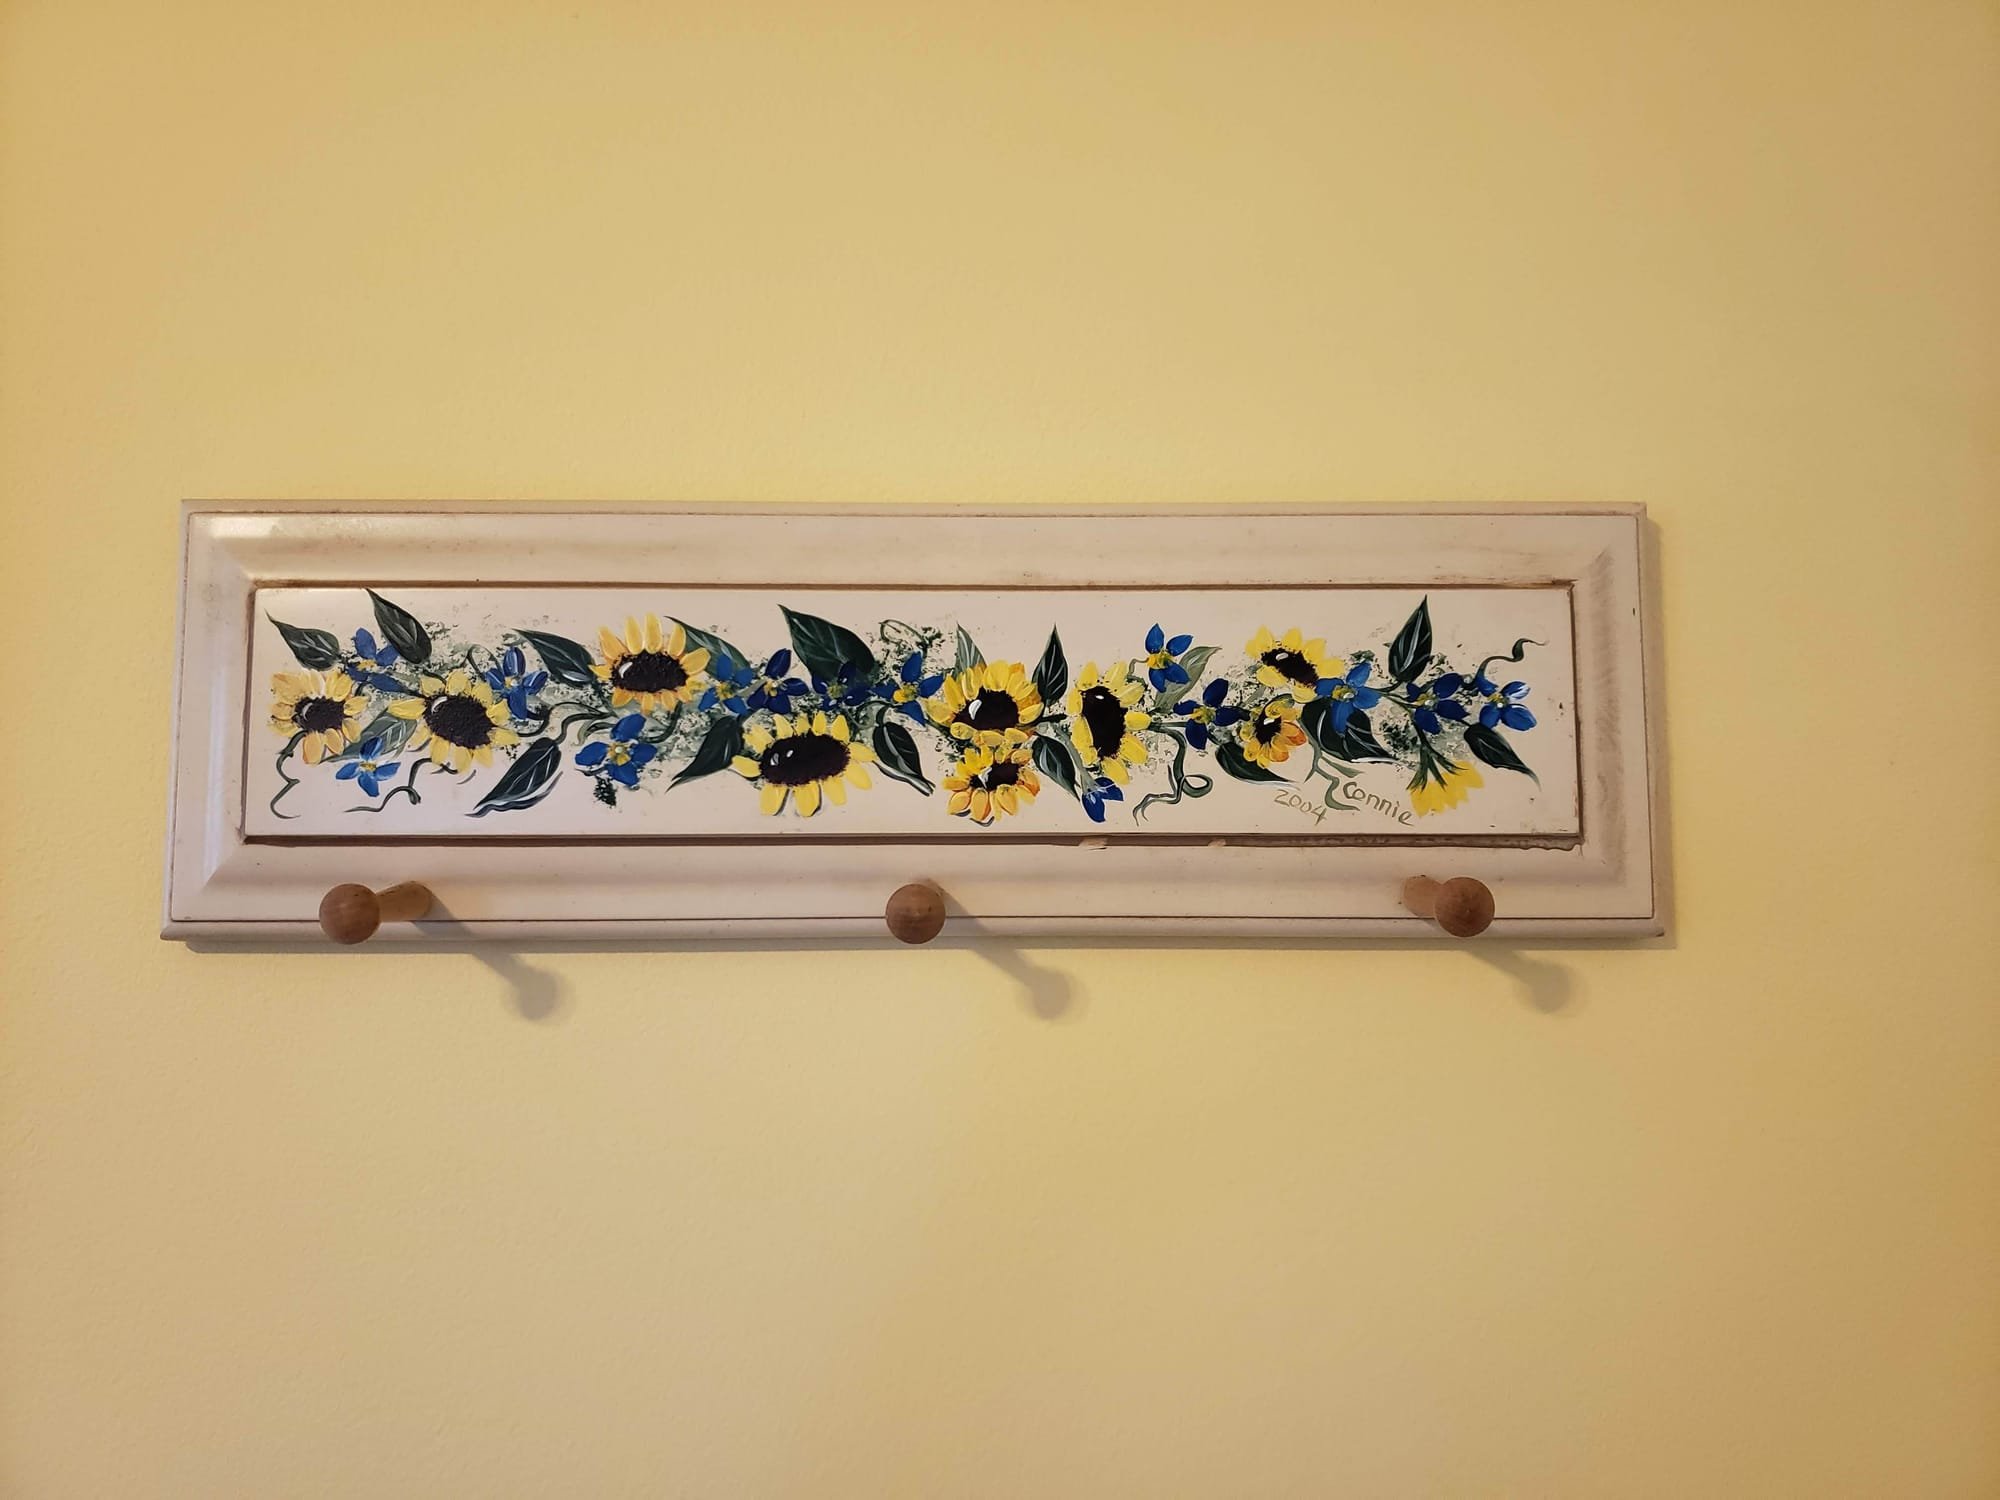 Wooden Panel with Pegs